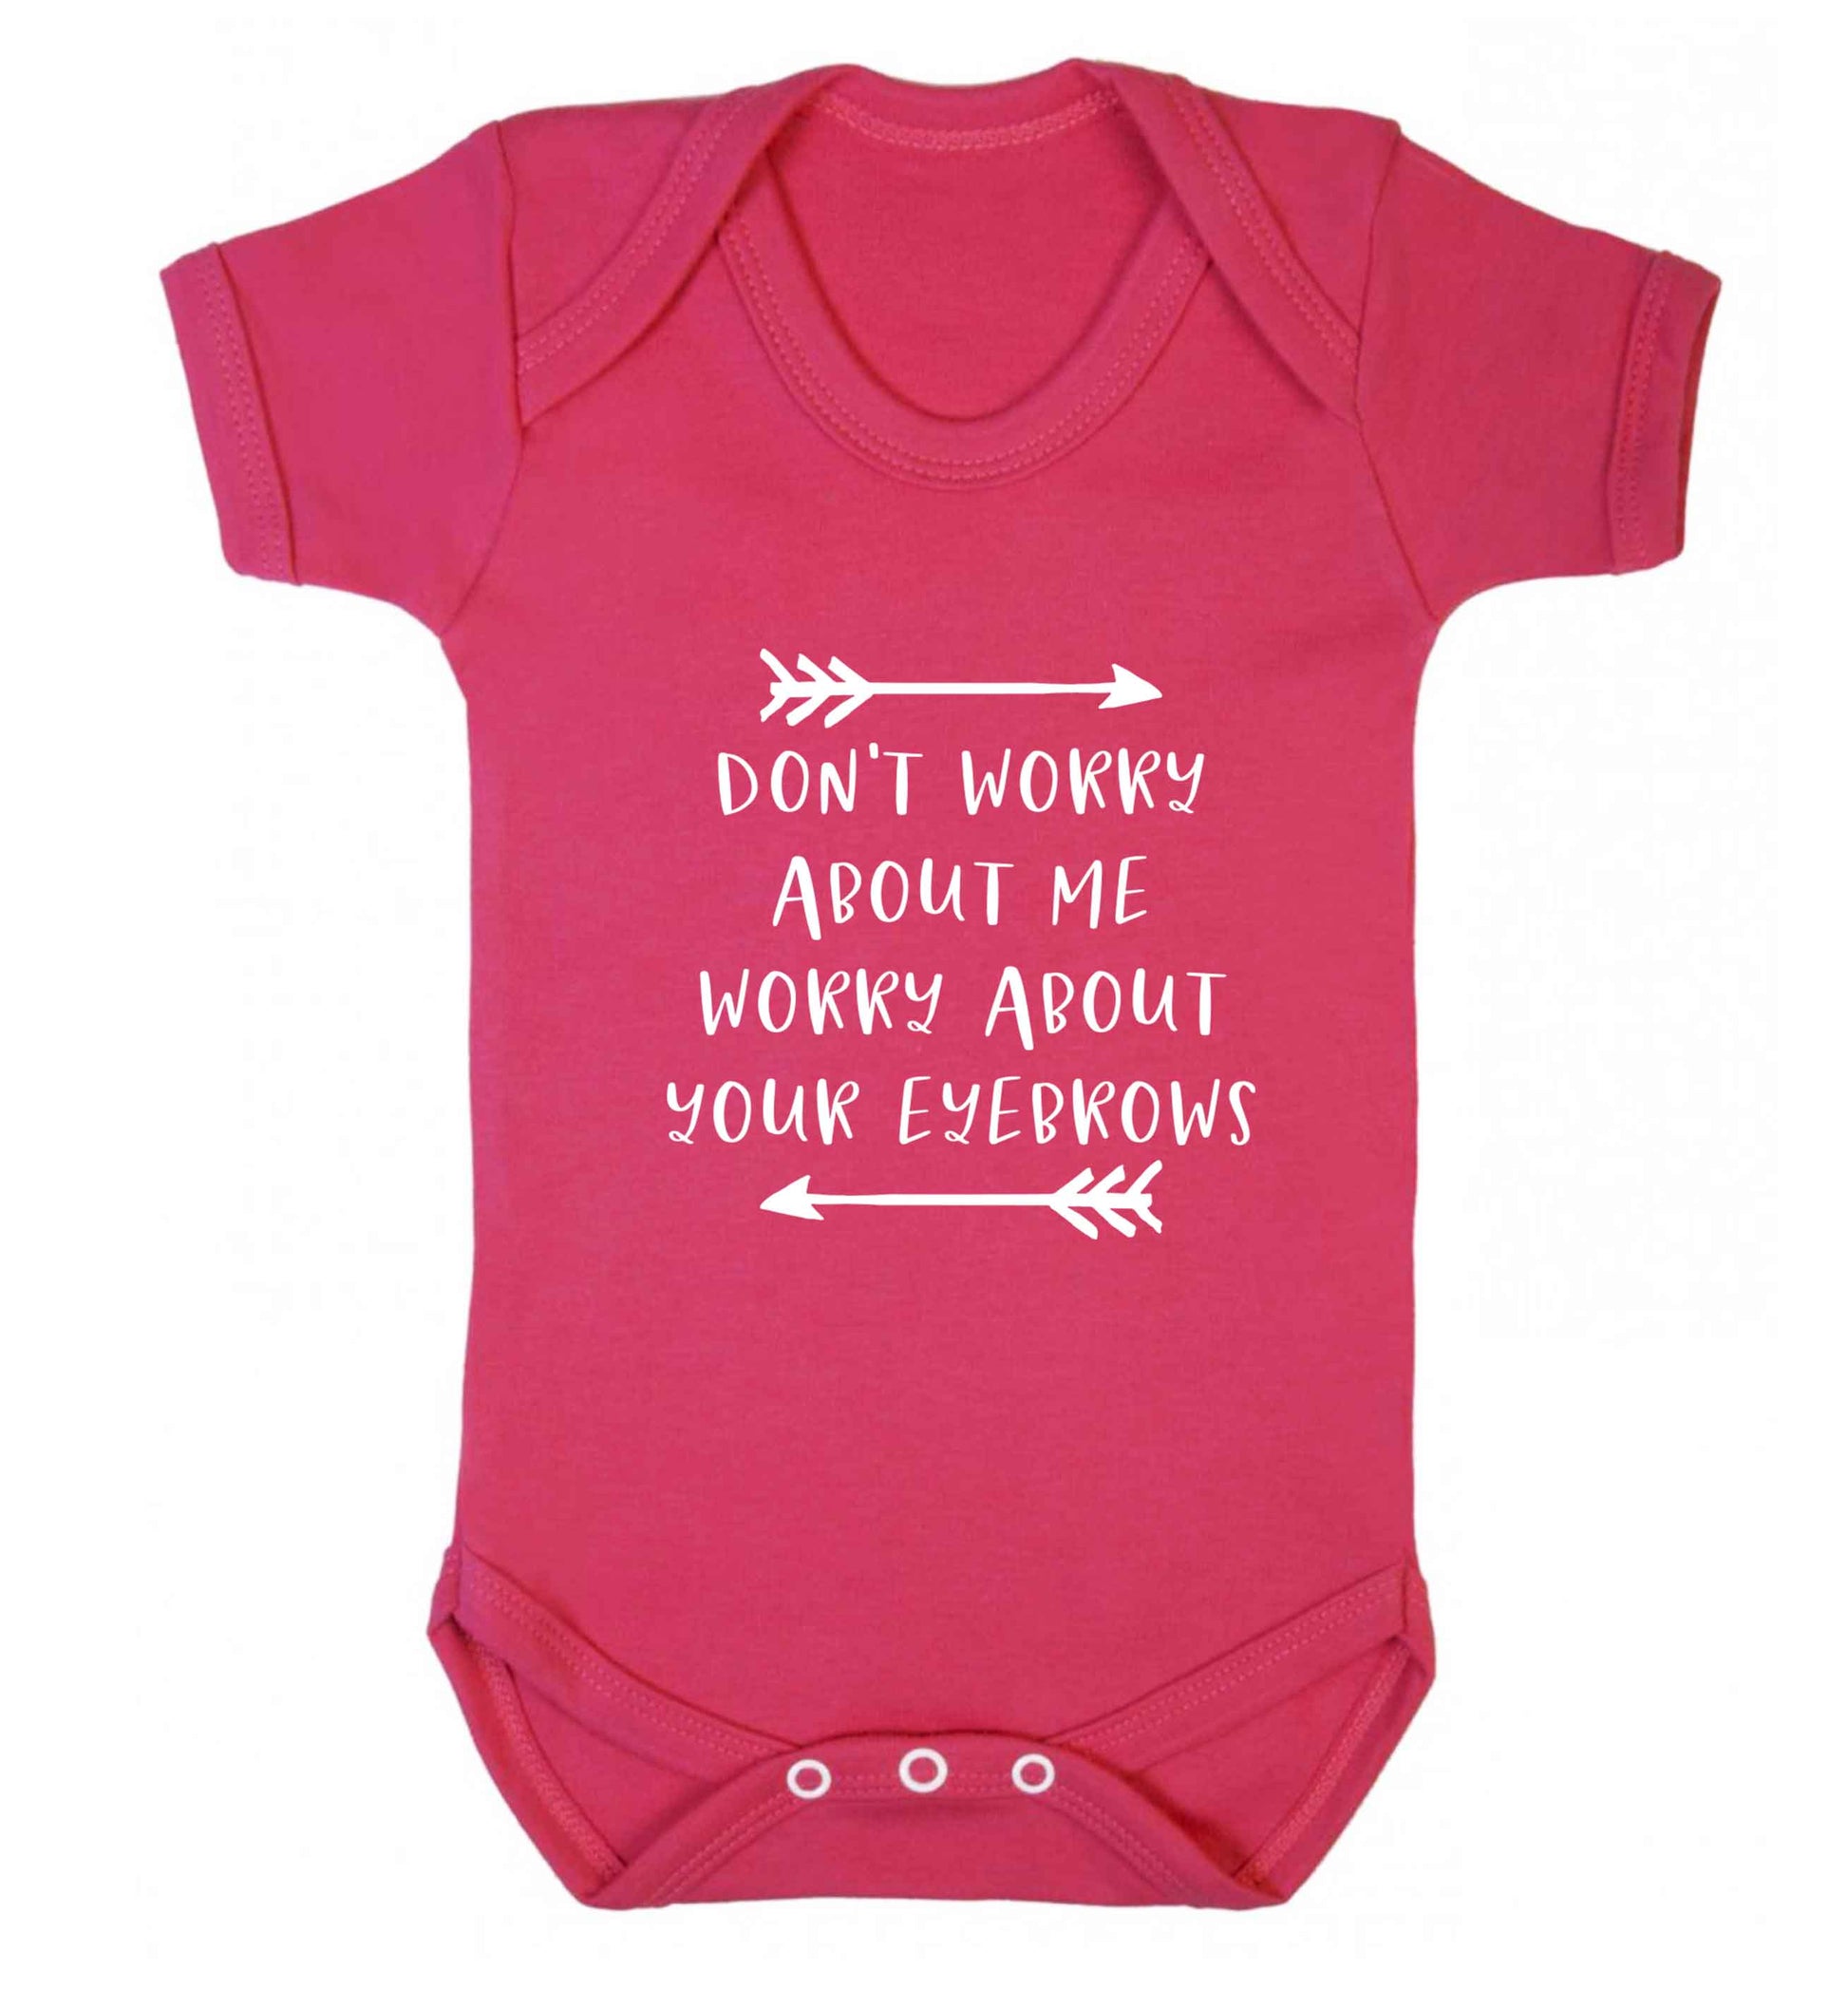 Don't worry about me worry about your eyebrows baby vest dark pink 18-24 months